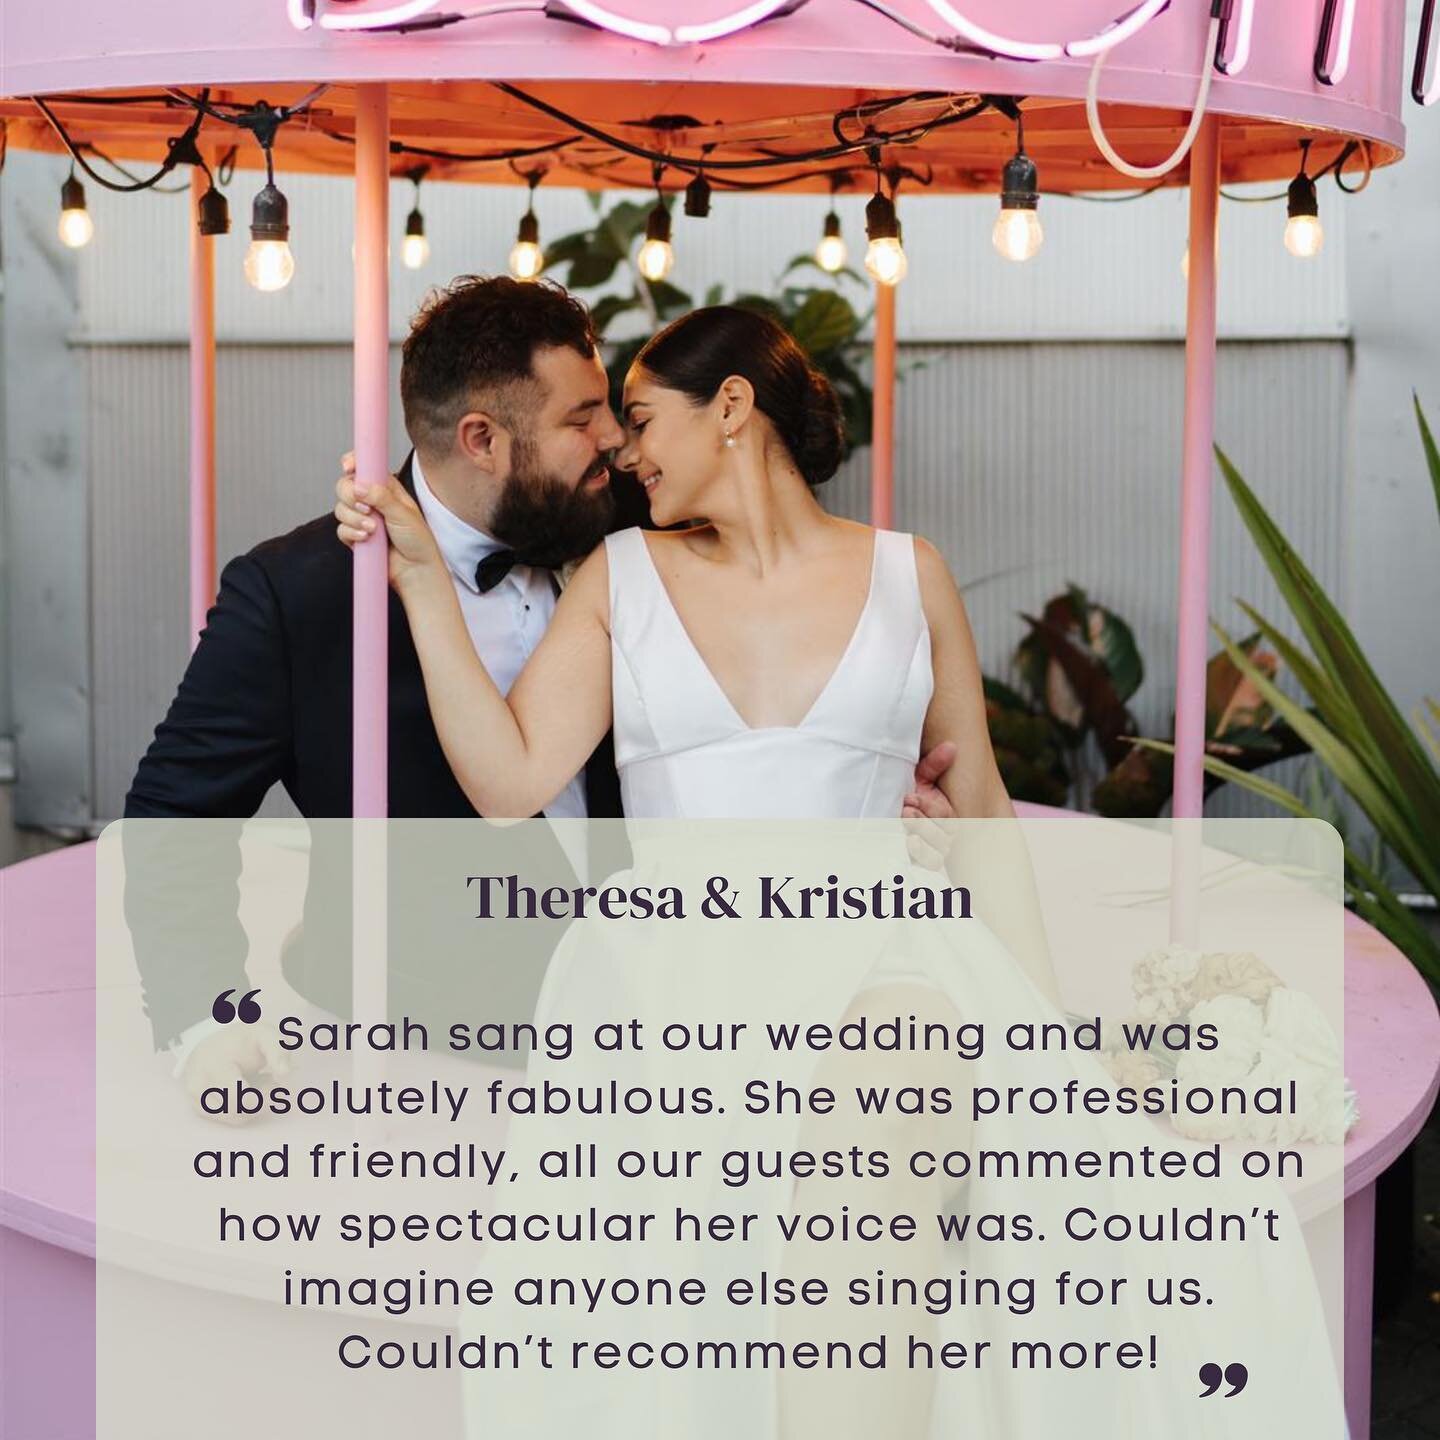 .
Theresa &amp; Kristian
. 
11.03.22 
.
A truly beautiful ceremony that we were grateful to be apart of. It was a pleasure singing for you 💗
.
.
.
.
.
.
.
.
.
.
.
.
.
.
.
.
.
.
#sydneywedding #weddingsinger #wedding #sydneycouples #weddingdress #wed